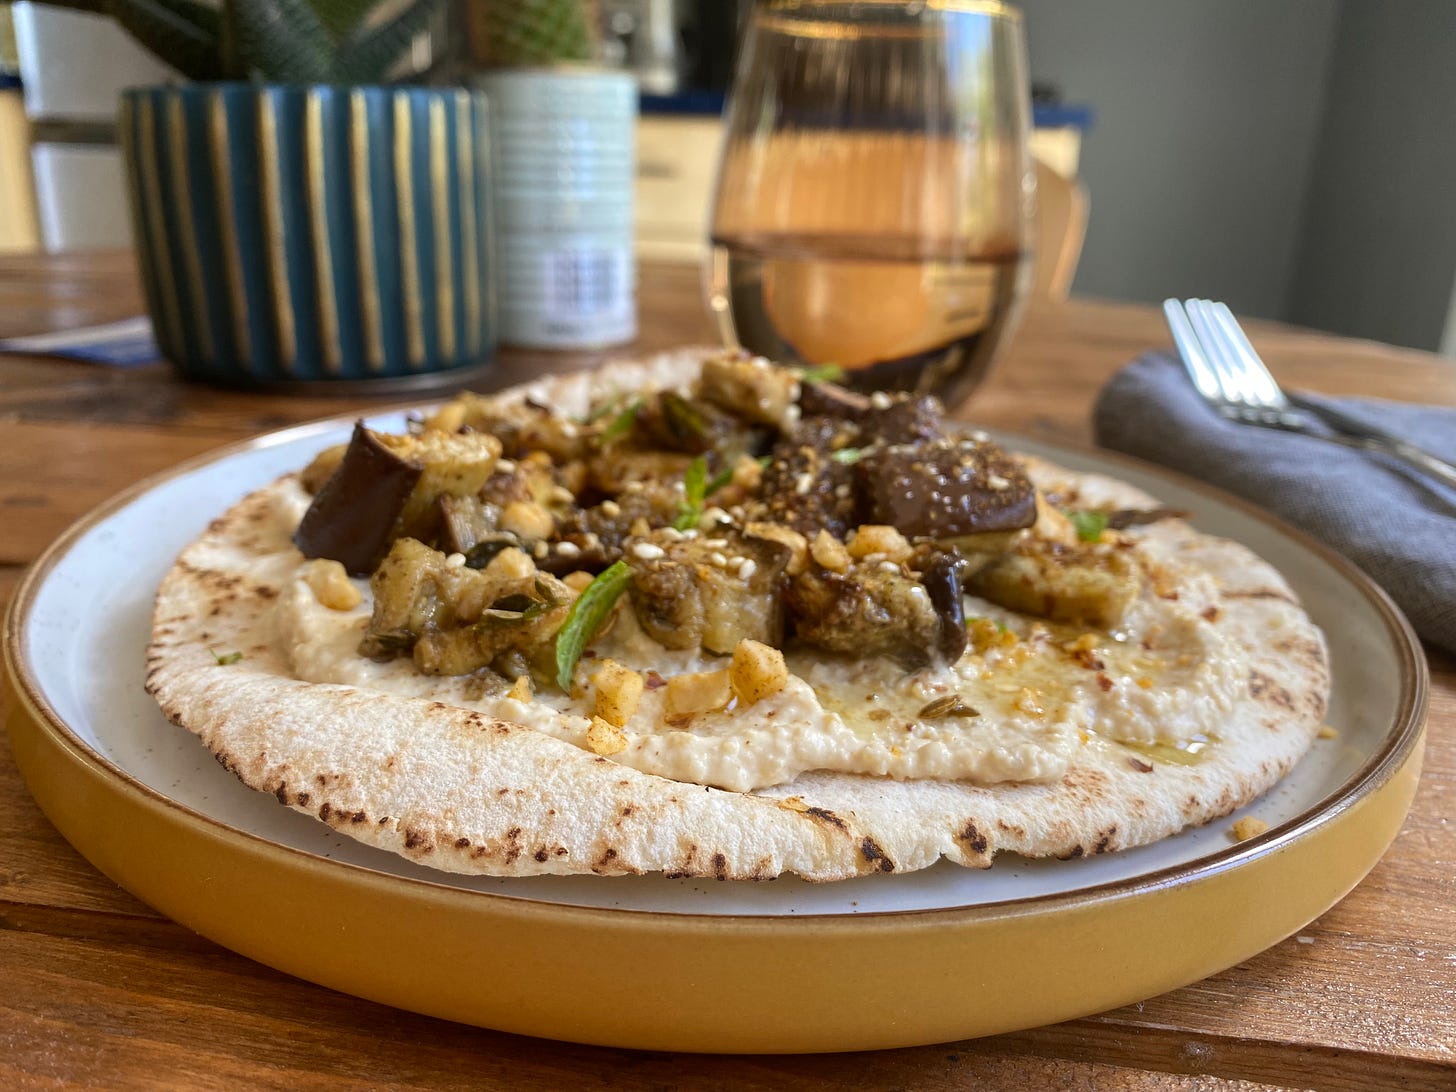 Open flatbread with houmous, aubergine, mint and toasted nuts and seeds. Flatbread is on a yellow-rimmed plate on a wooden table. A glass, and cutlery are placed nearby.